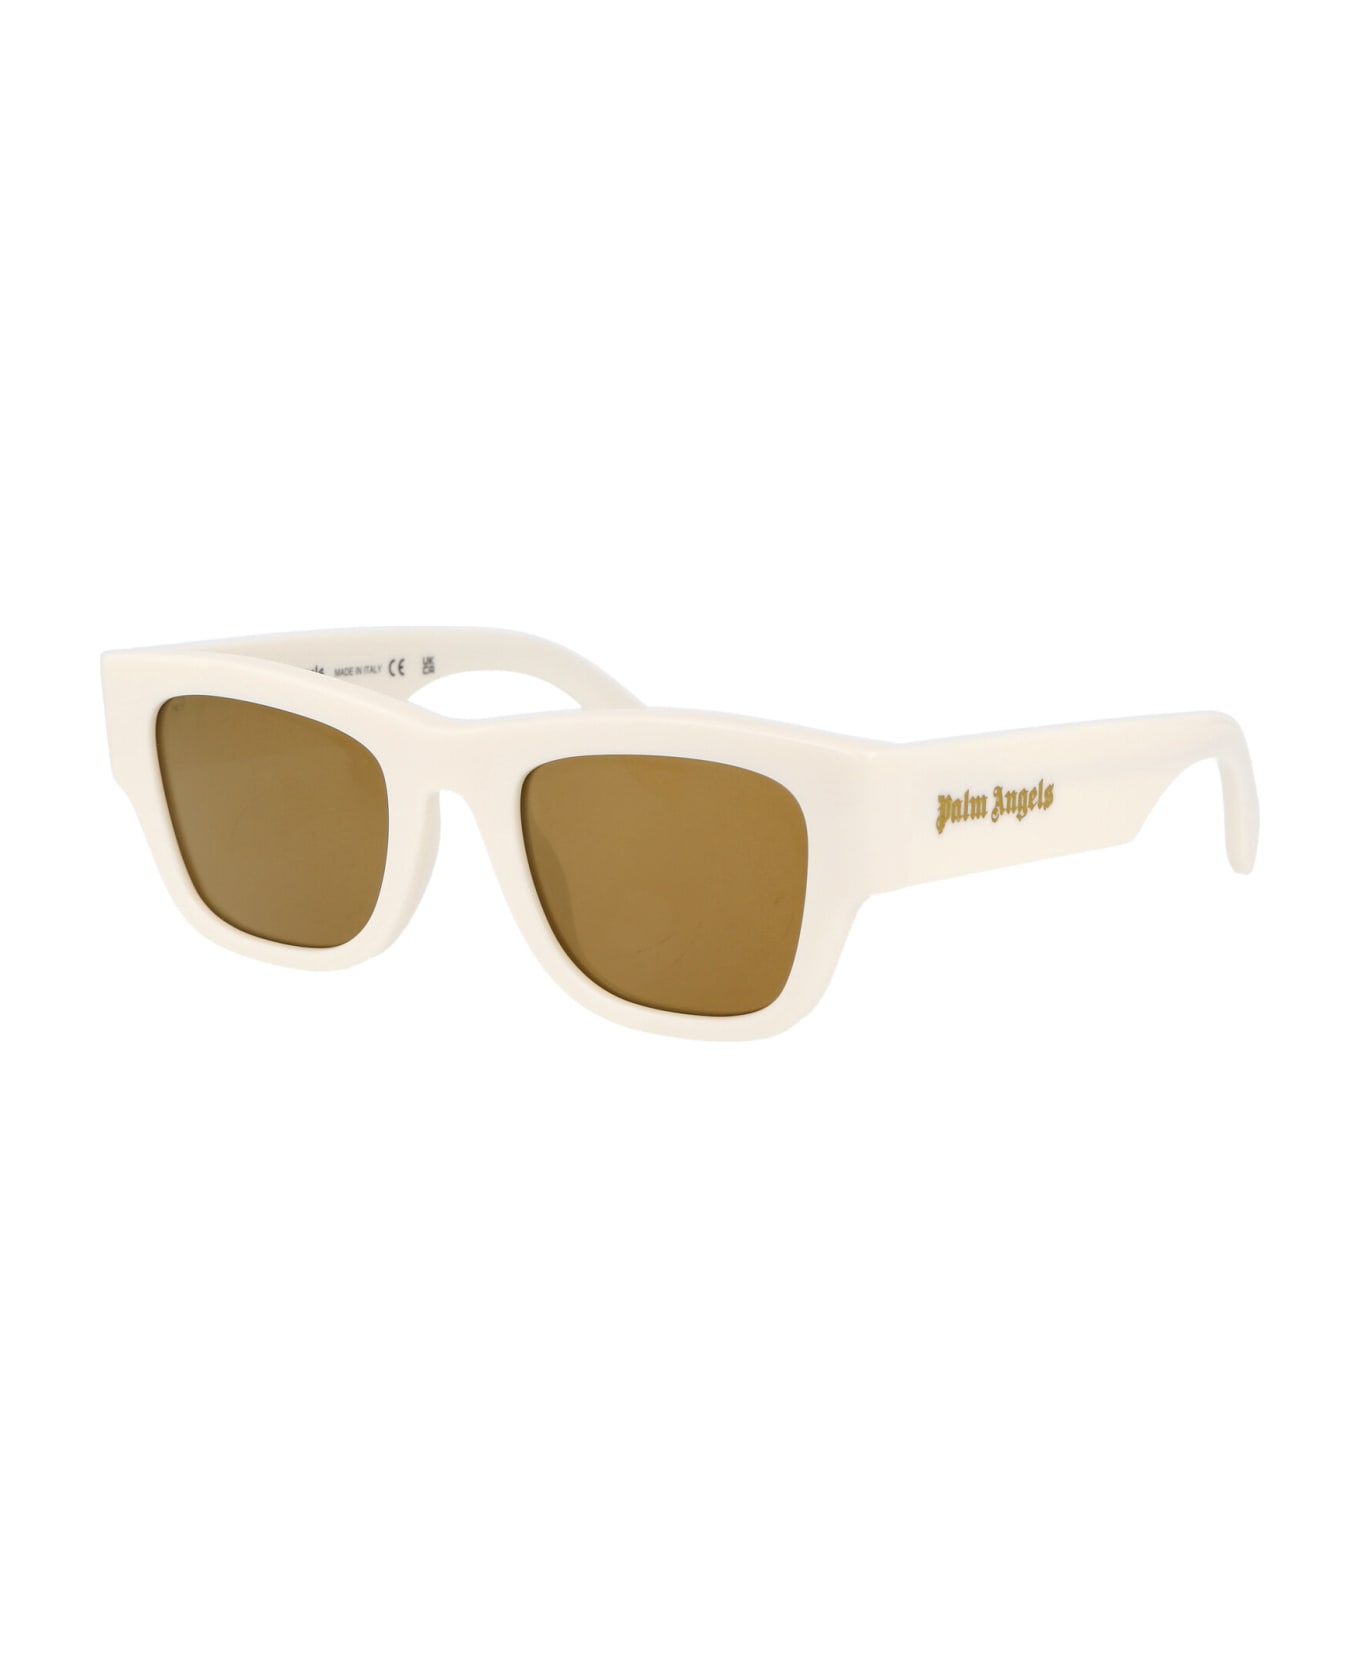 Palm Angels Volcan Sunglasses - 0176 WHITE MIRROR GOLD